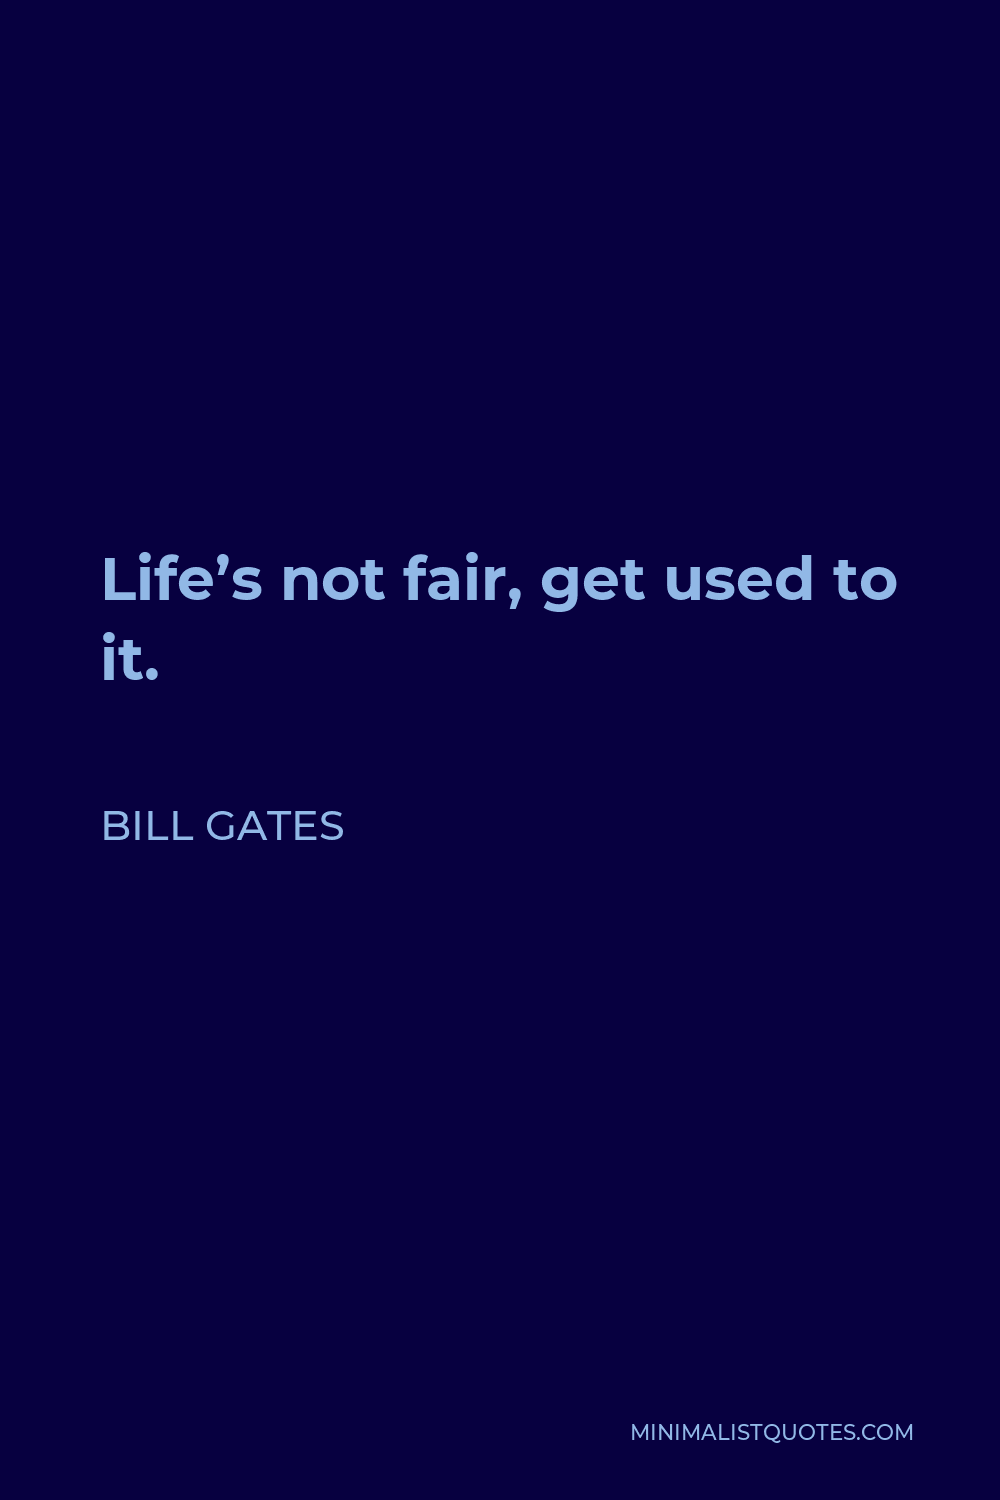 Bill Gates Quote - Life’s not fair, get used to it.